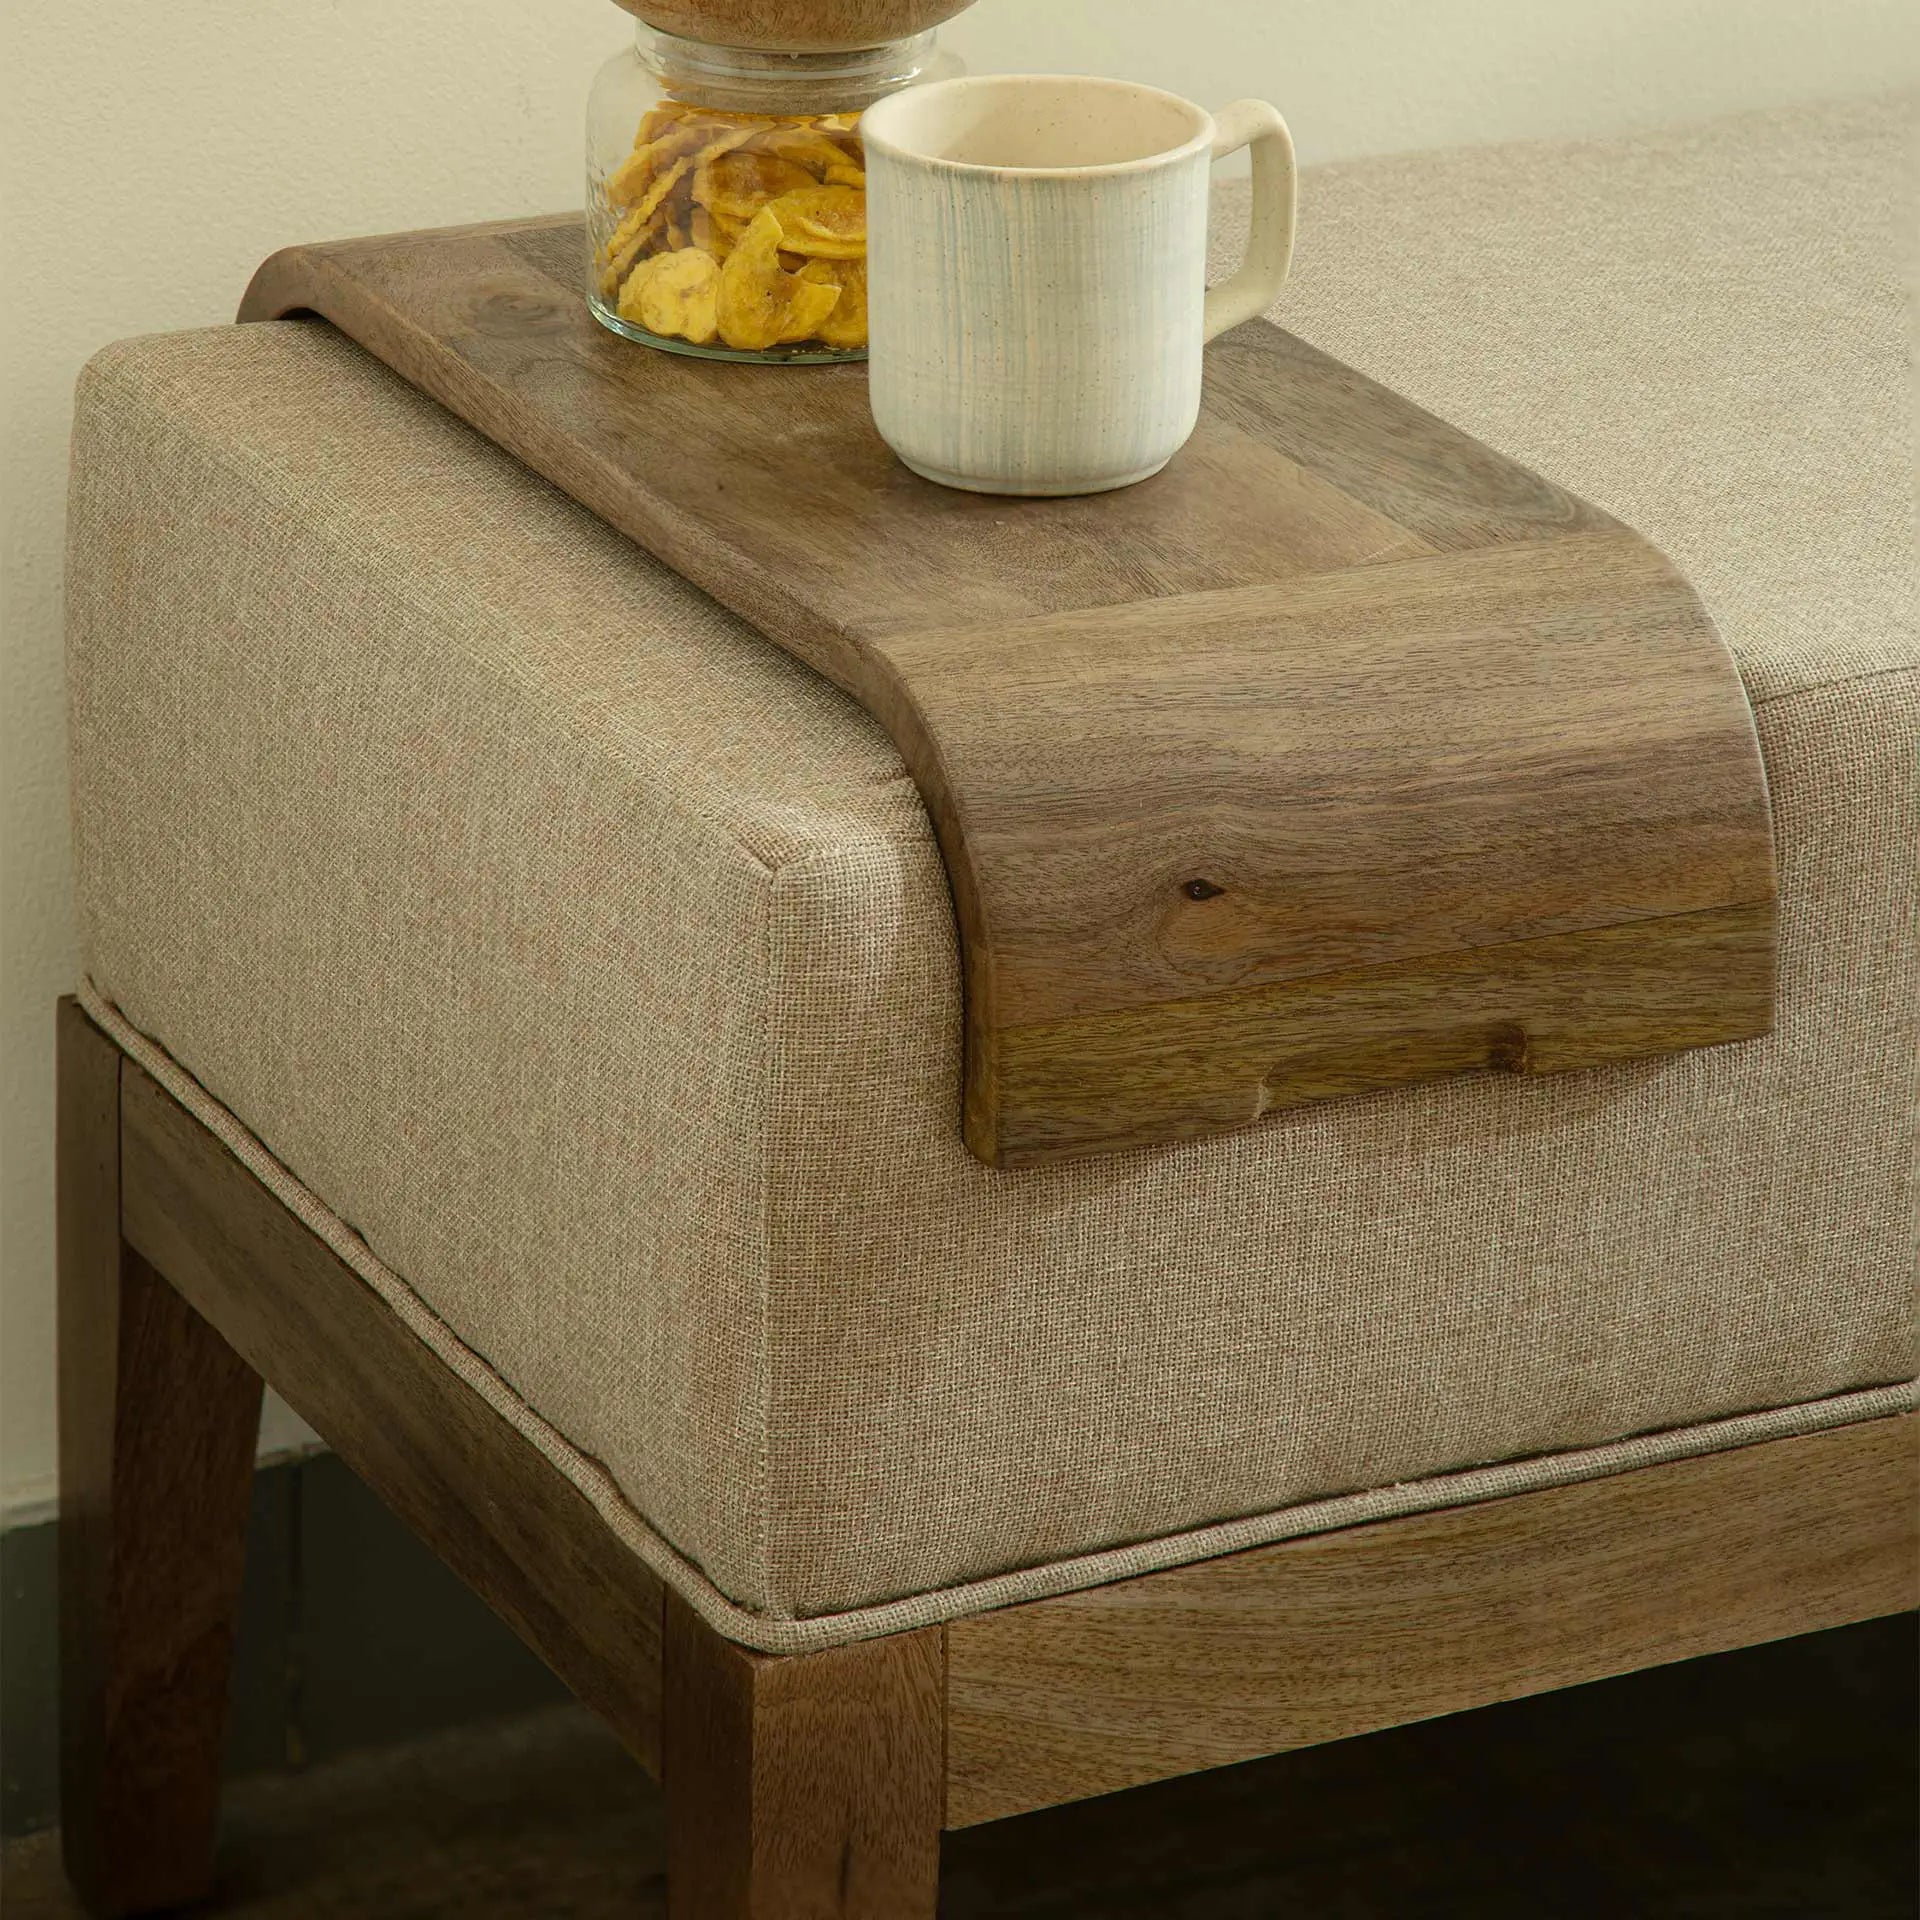 Upholstered Wooden Bench with Wooden Slider